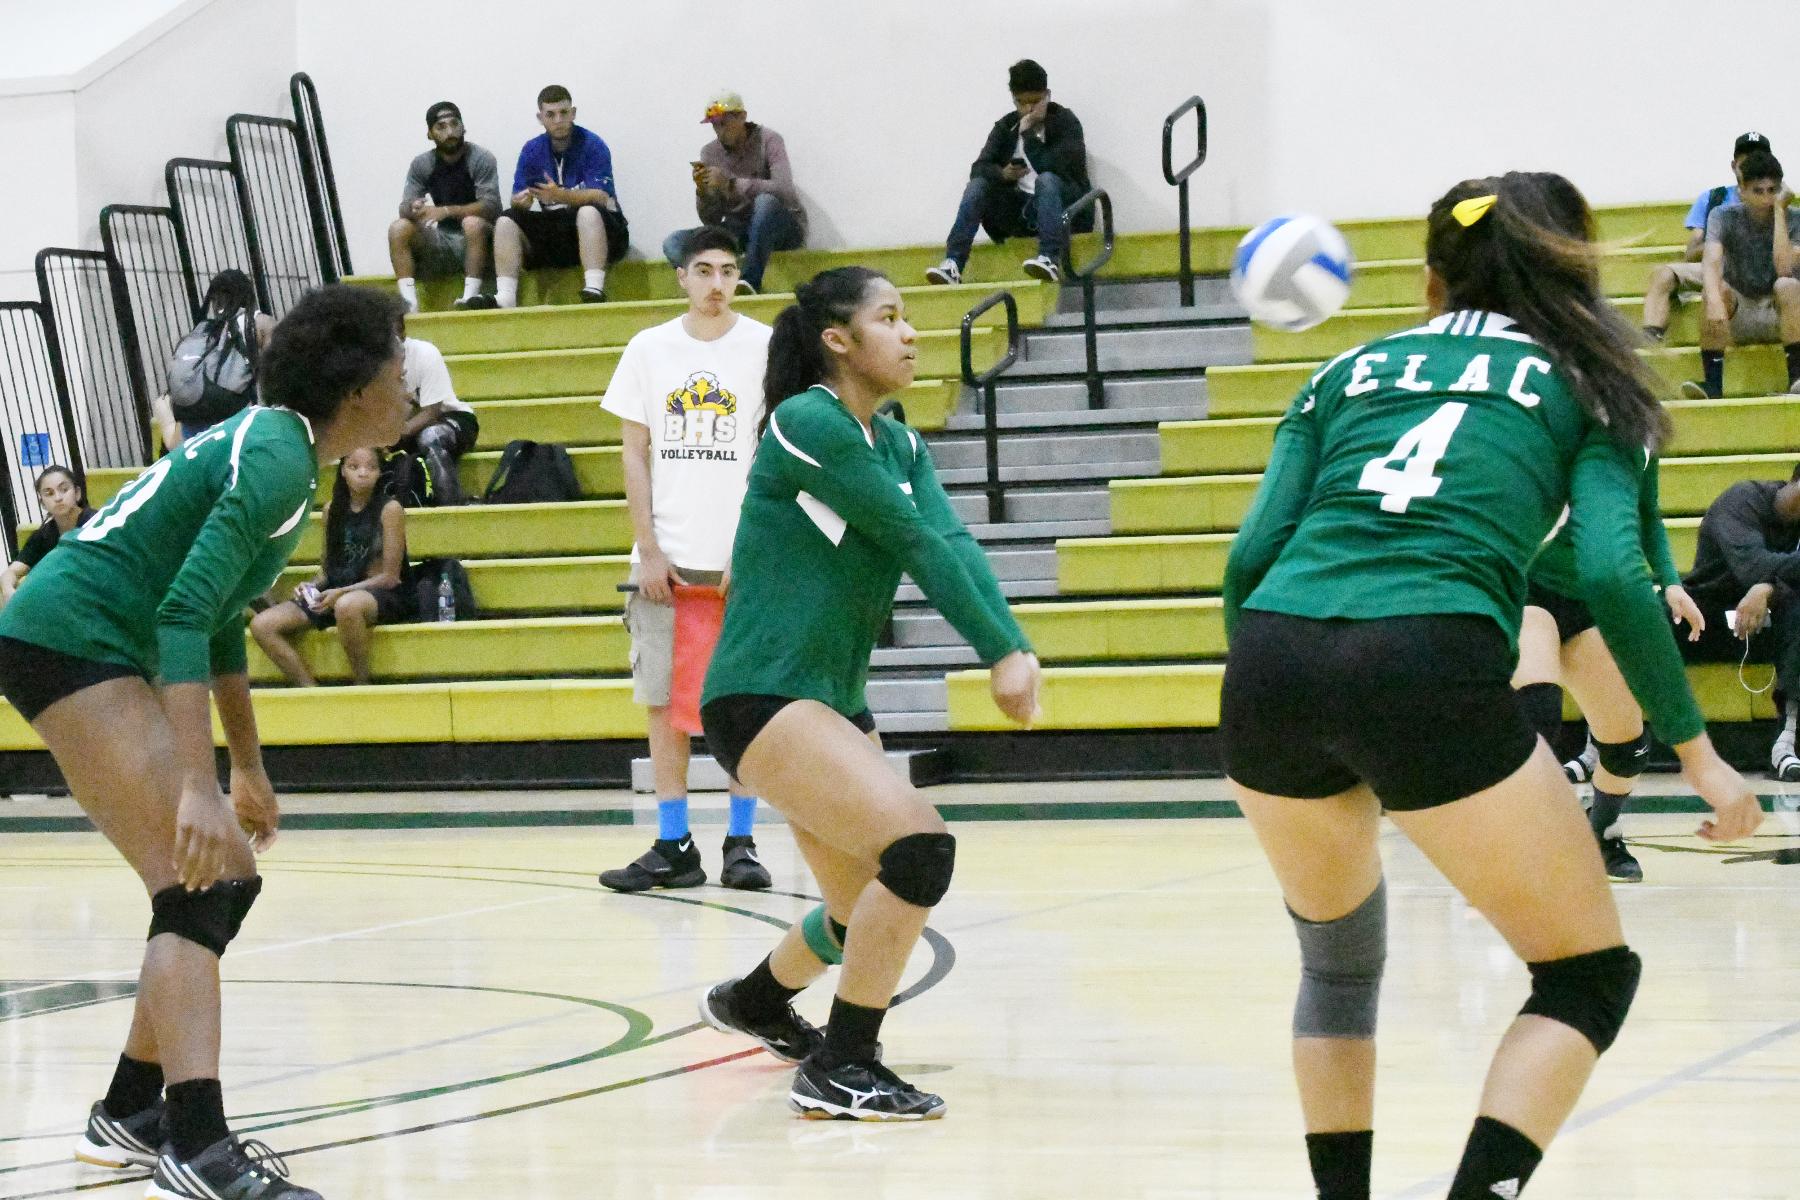 East Los Angeles College sophomore middle hitter Angela Wade (center) connects on one of her 24 digs in the Huskies 5-set win vs. the California Lutheran University JV team on Sept. 21. (Photo by DeeDee Jackson)